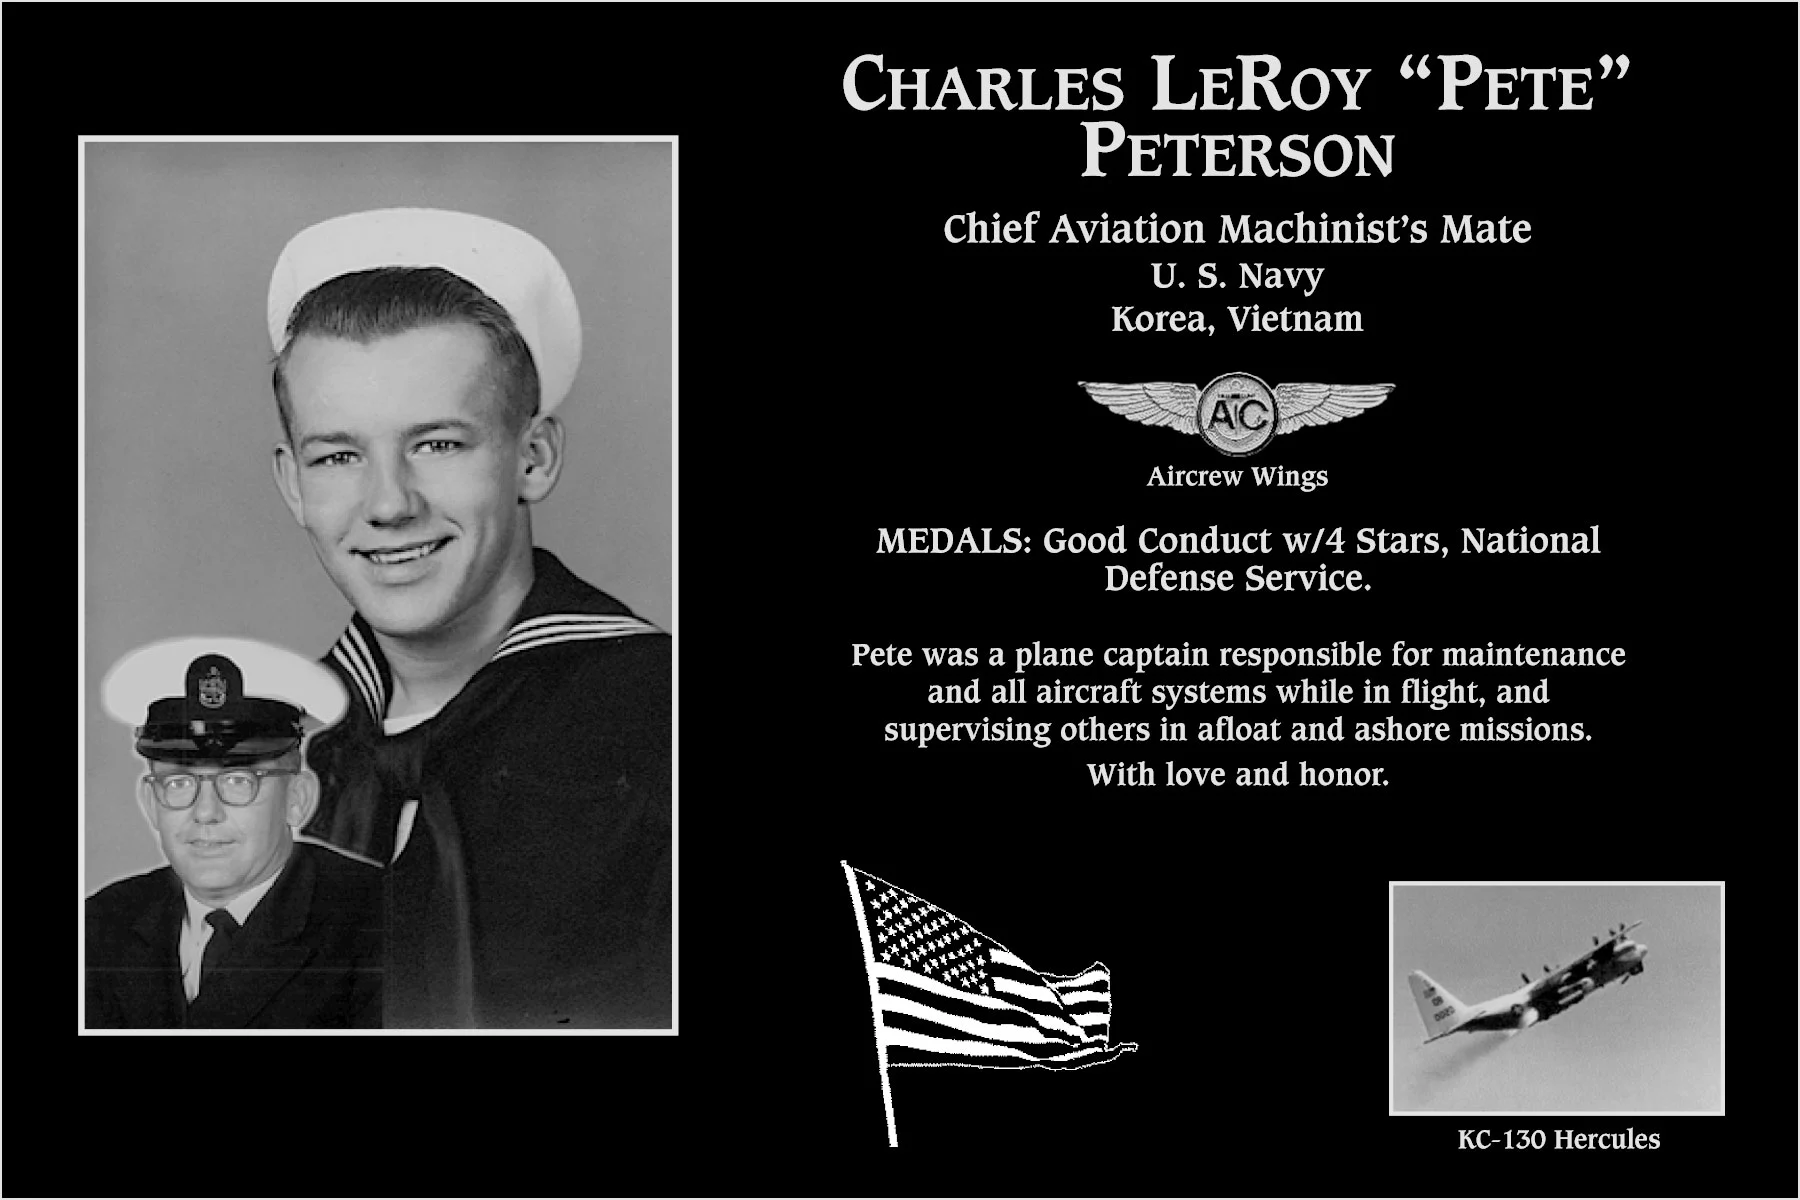 Charles LeRoy “Pete” Peterson